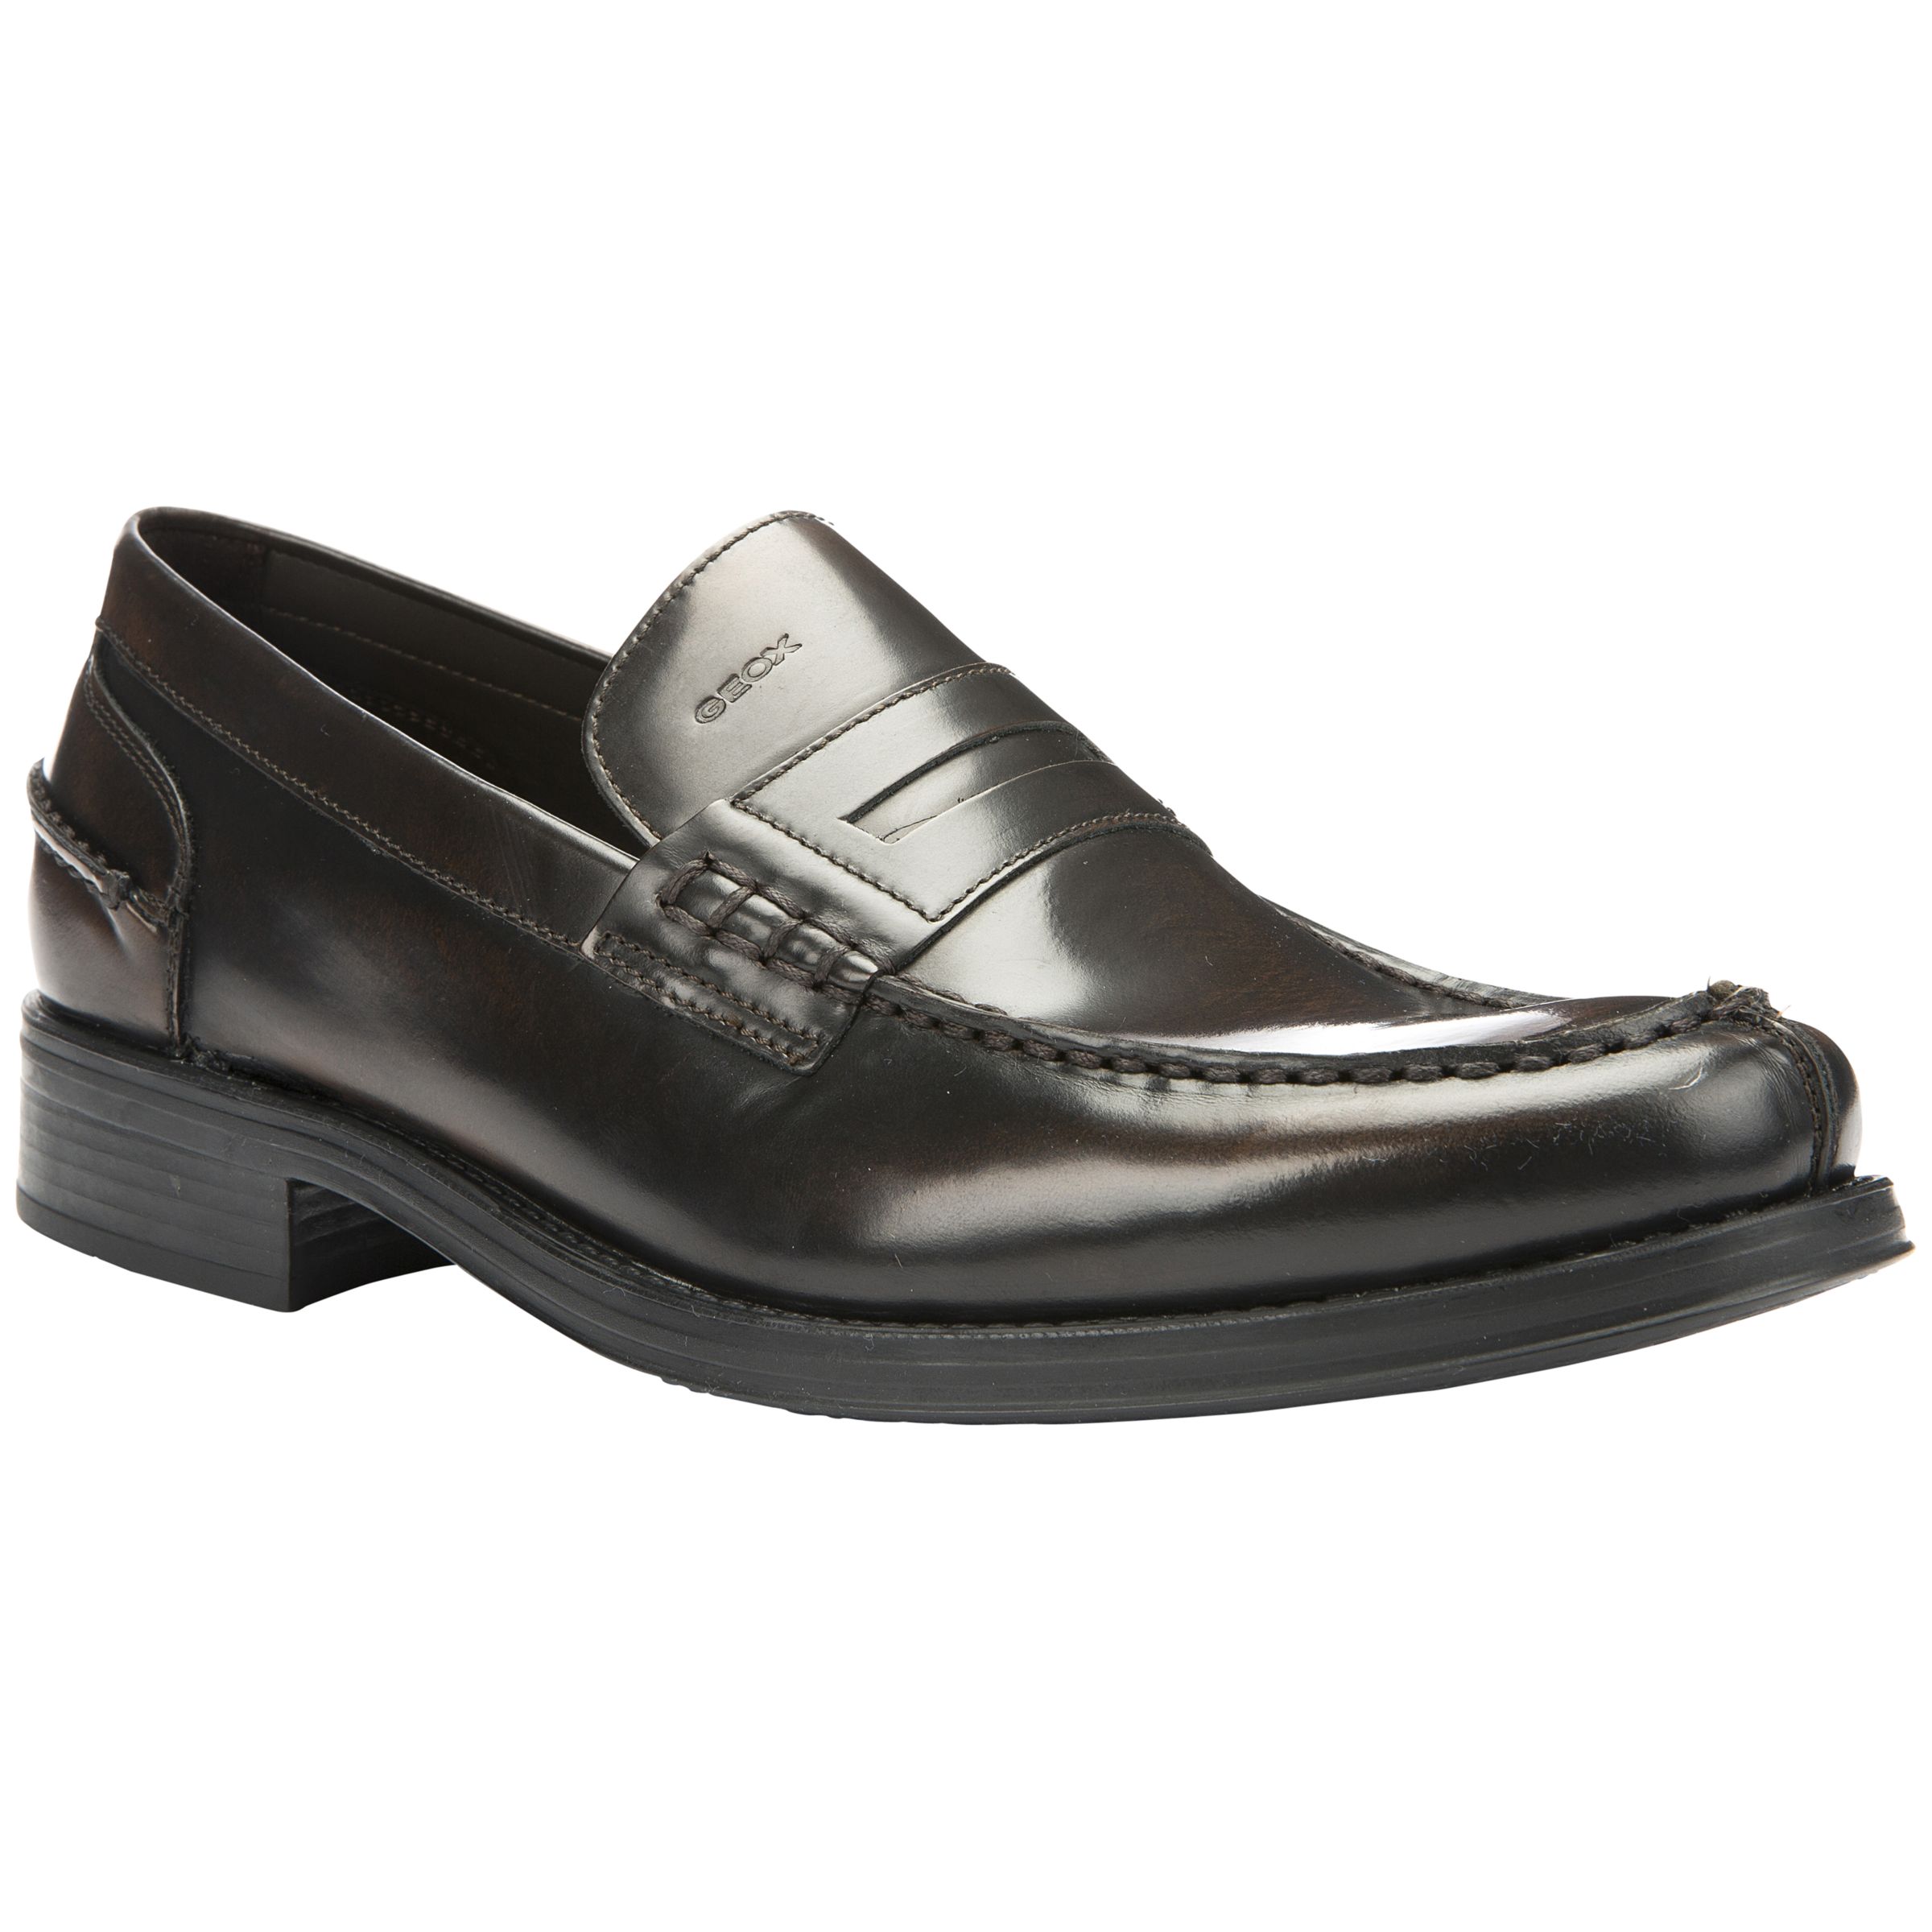 Buy Geox Silvio Leather Penny Loafer Shoes, Chestnut Online at ...